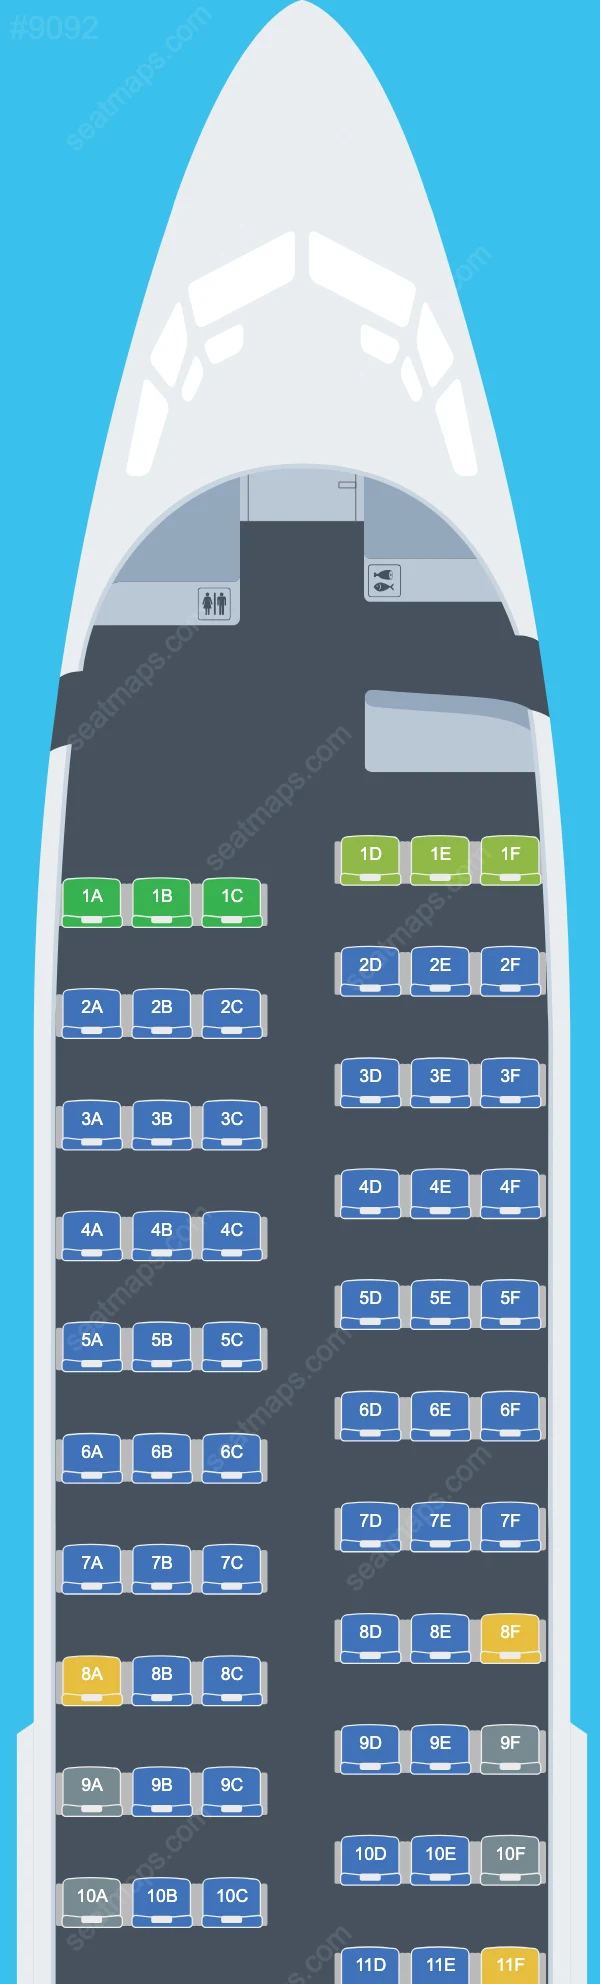 Yakutia Airlines Boeing 737 aircraft seat map  737-700